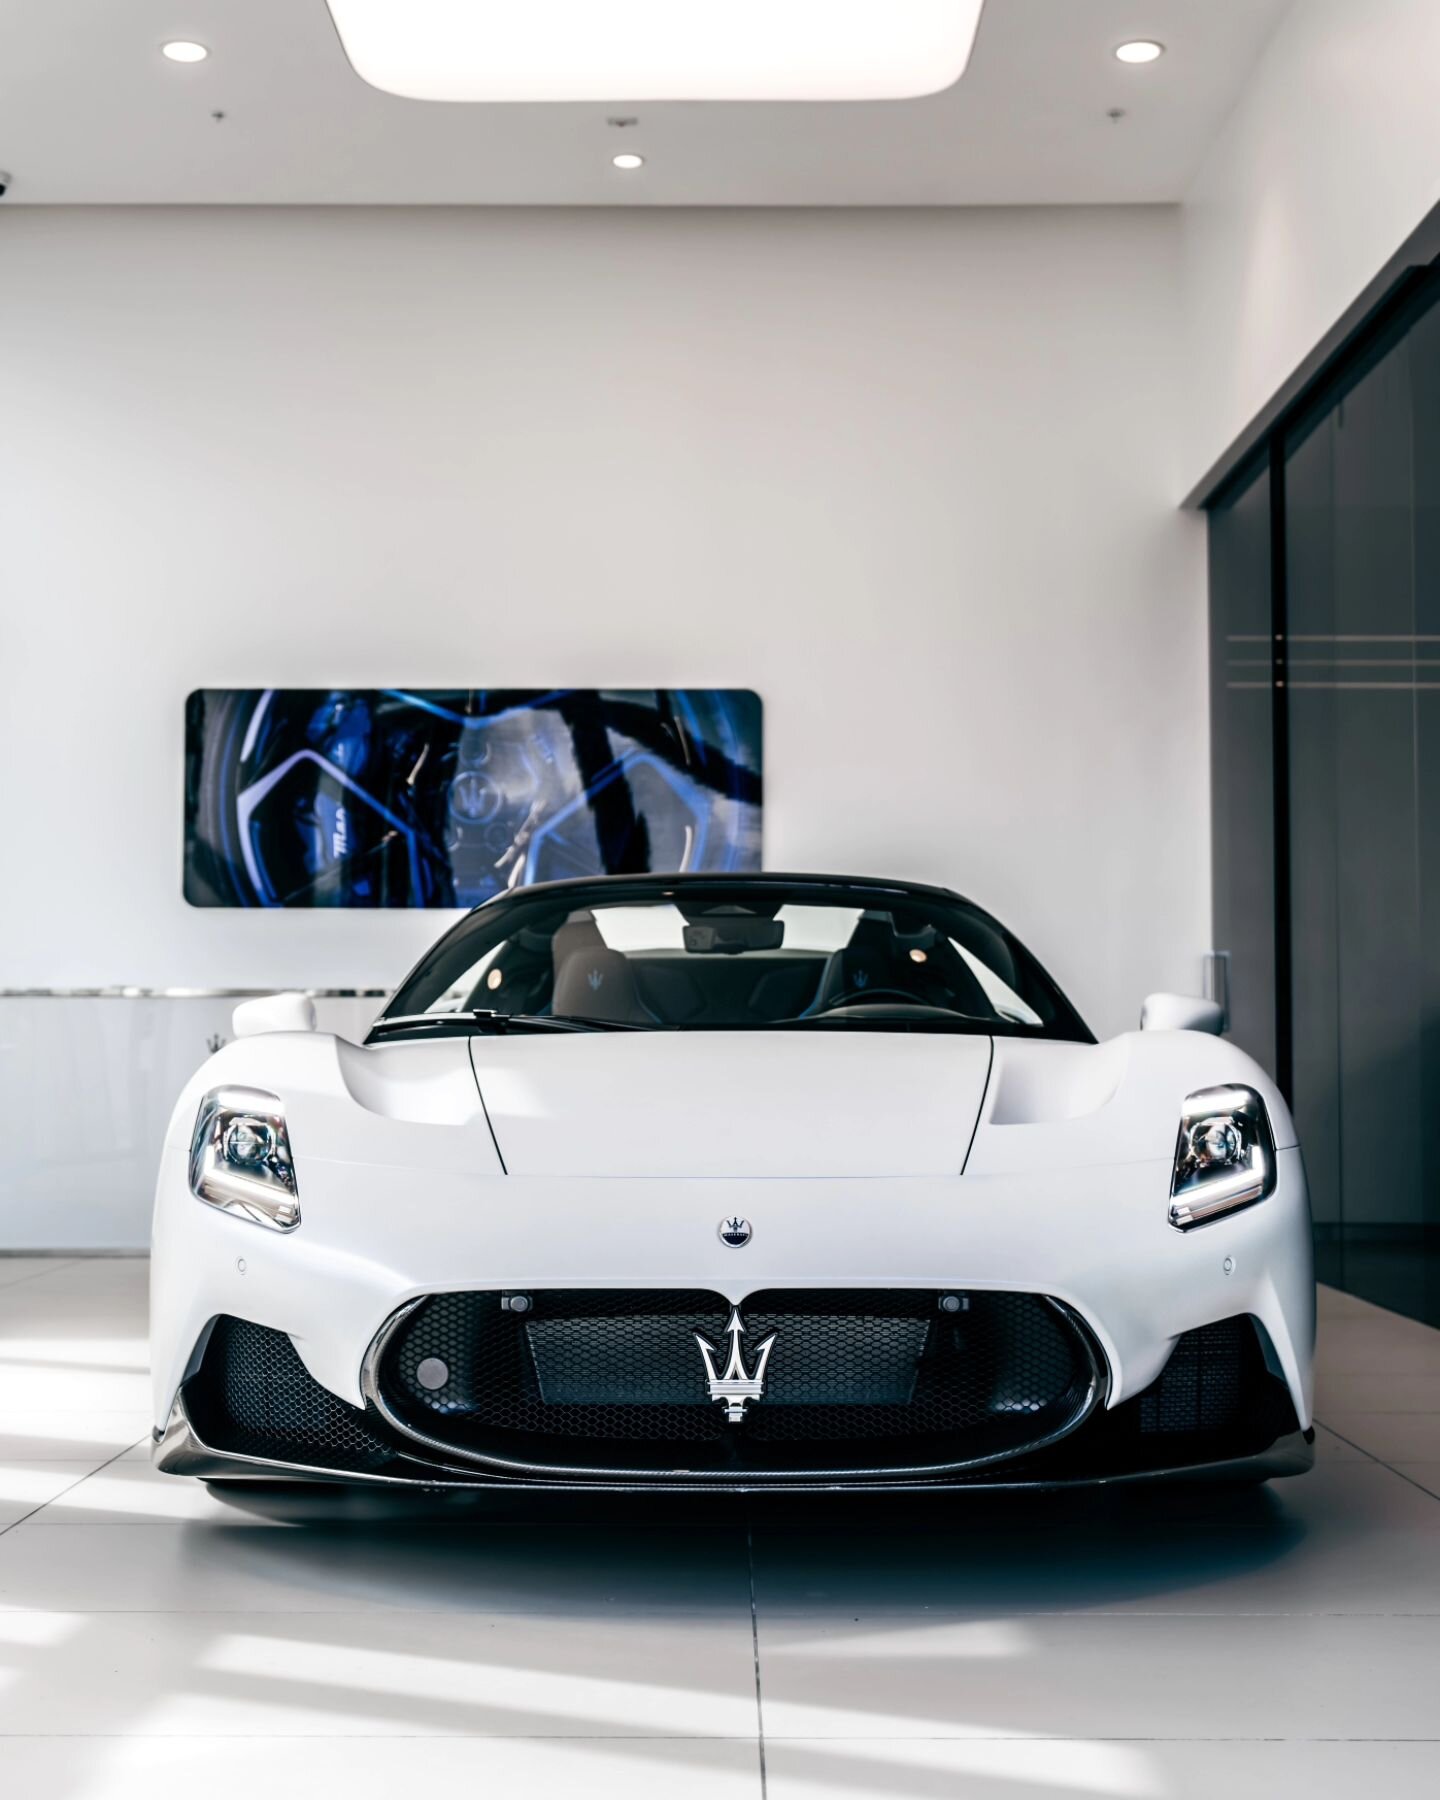 Impossible to find an angle on the MC20 that isn't perfection...This spec is a factory Matte White (Bianco Audace) with a convertible glass hard top that changes between opaque and transparent with the push of a button! Shot on the Sony A1 

Car: @_p